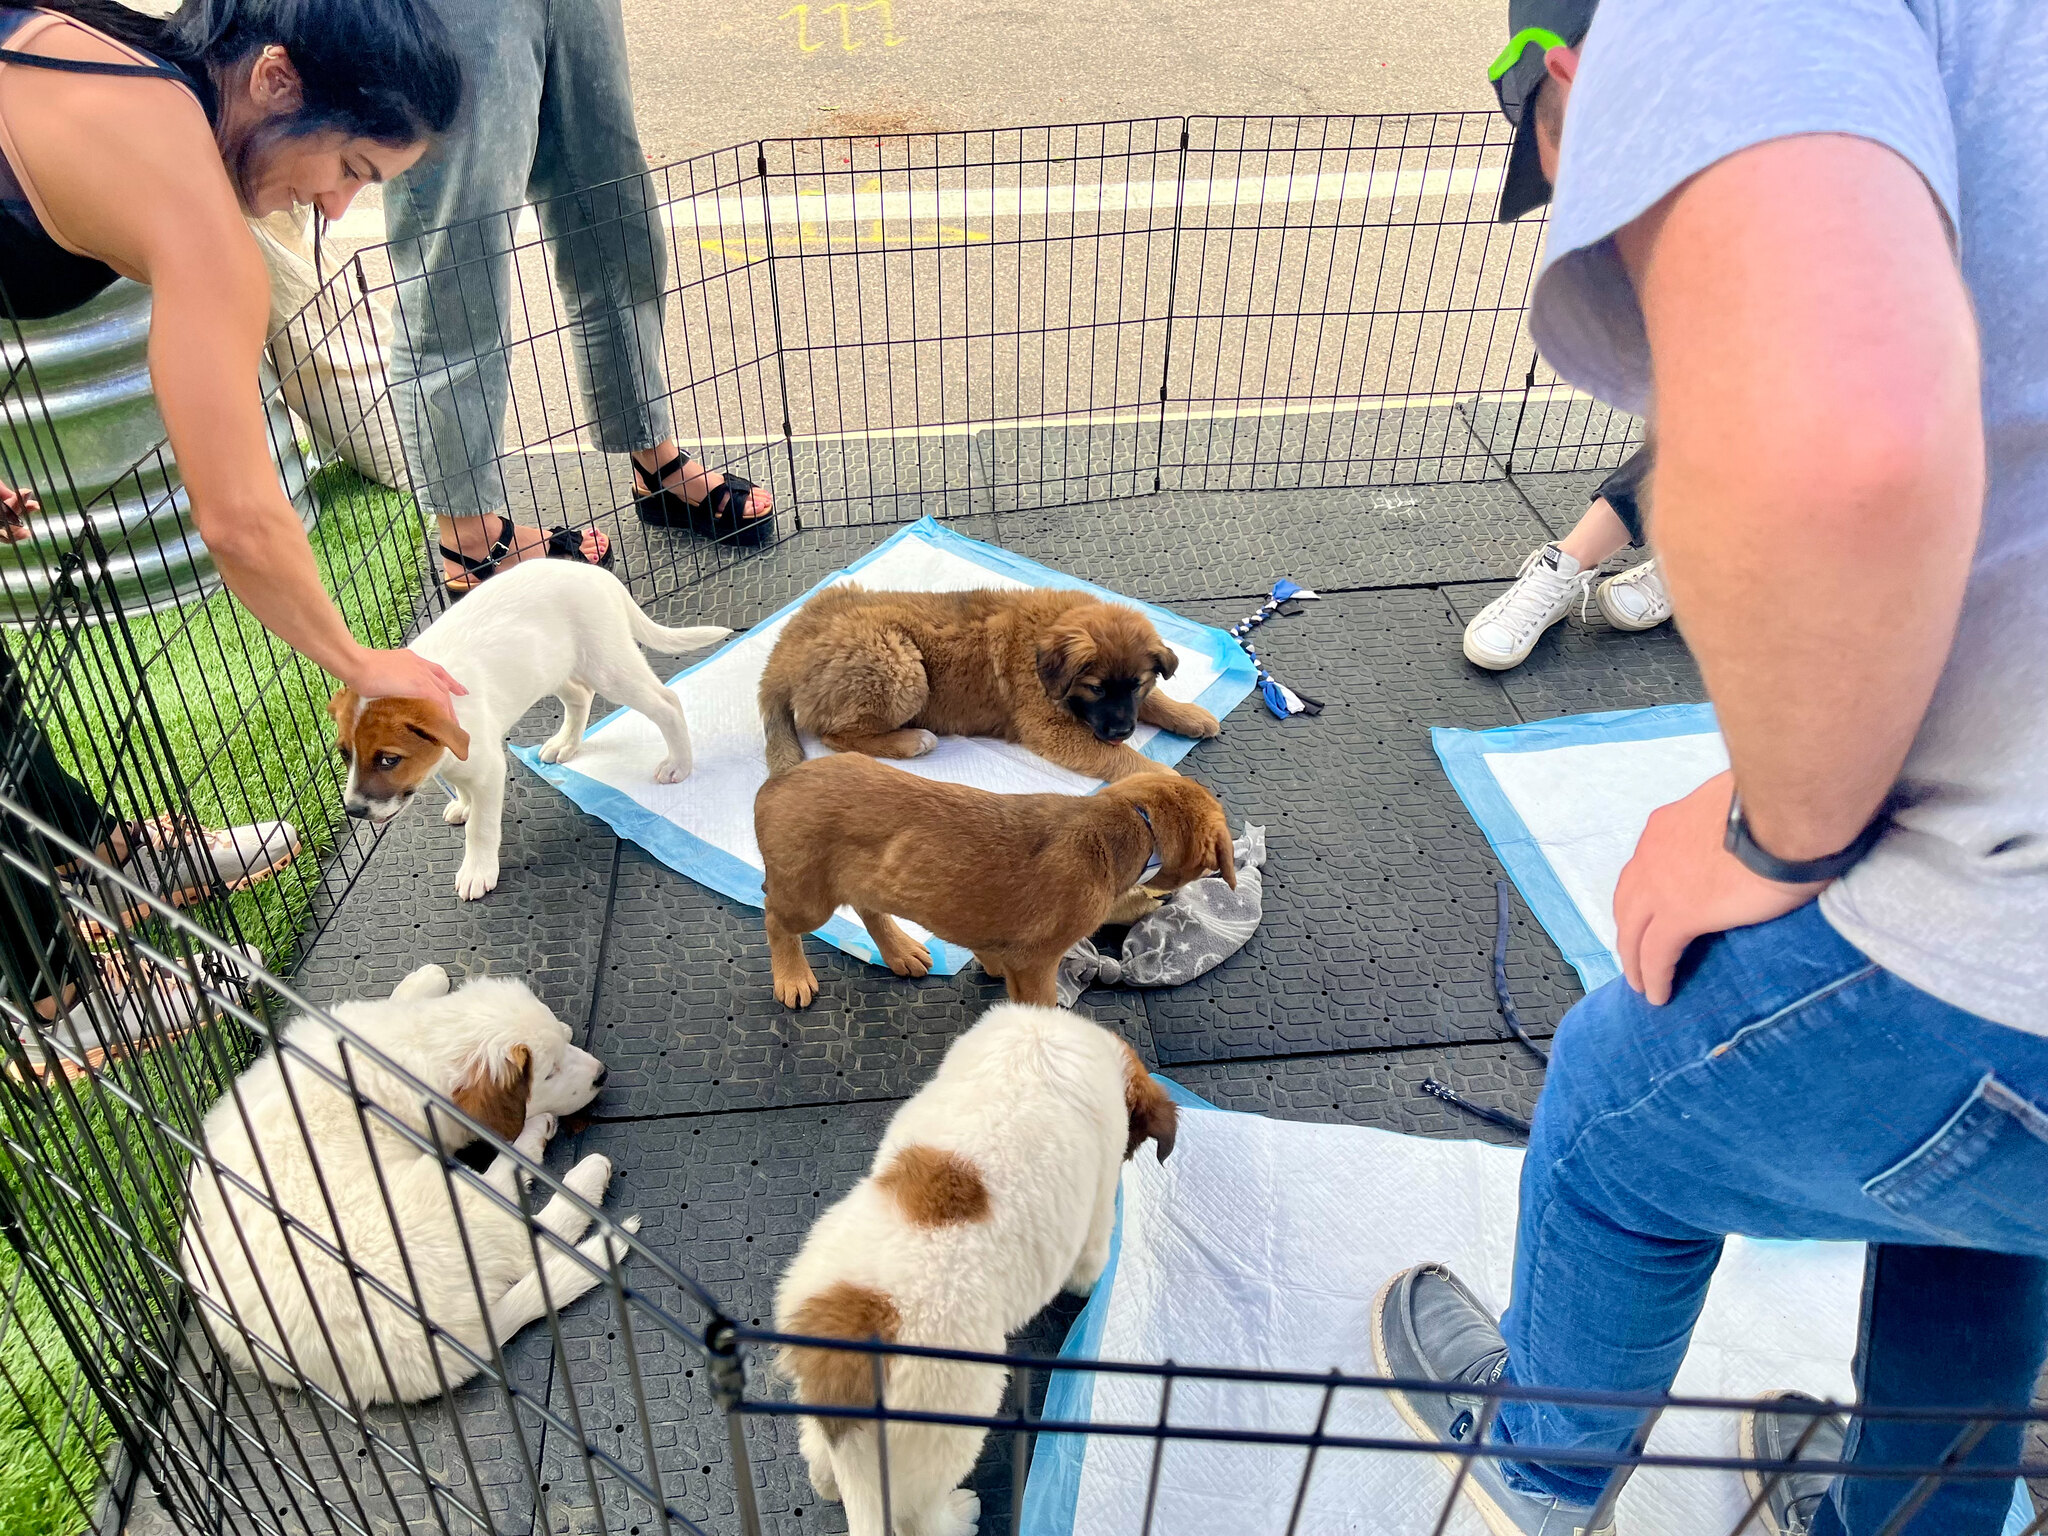 Several puppies standing in a small enclosure while people bend in to pet them.